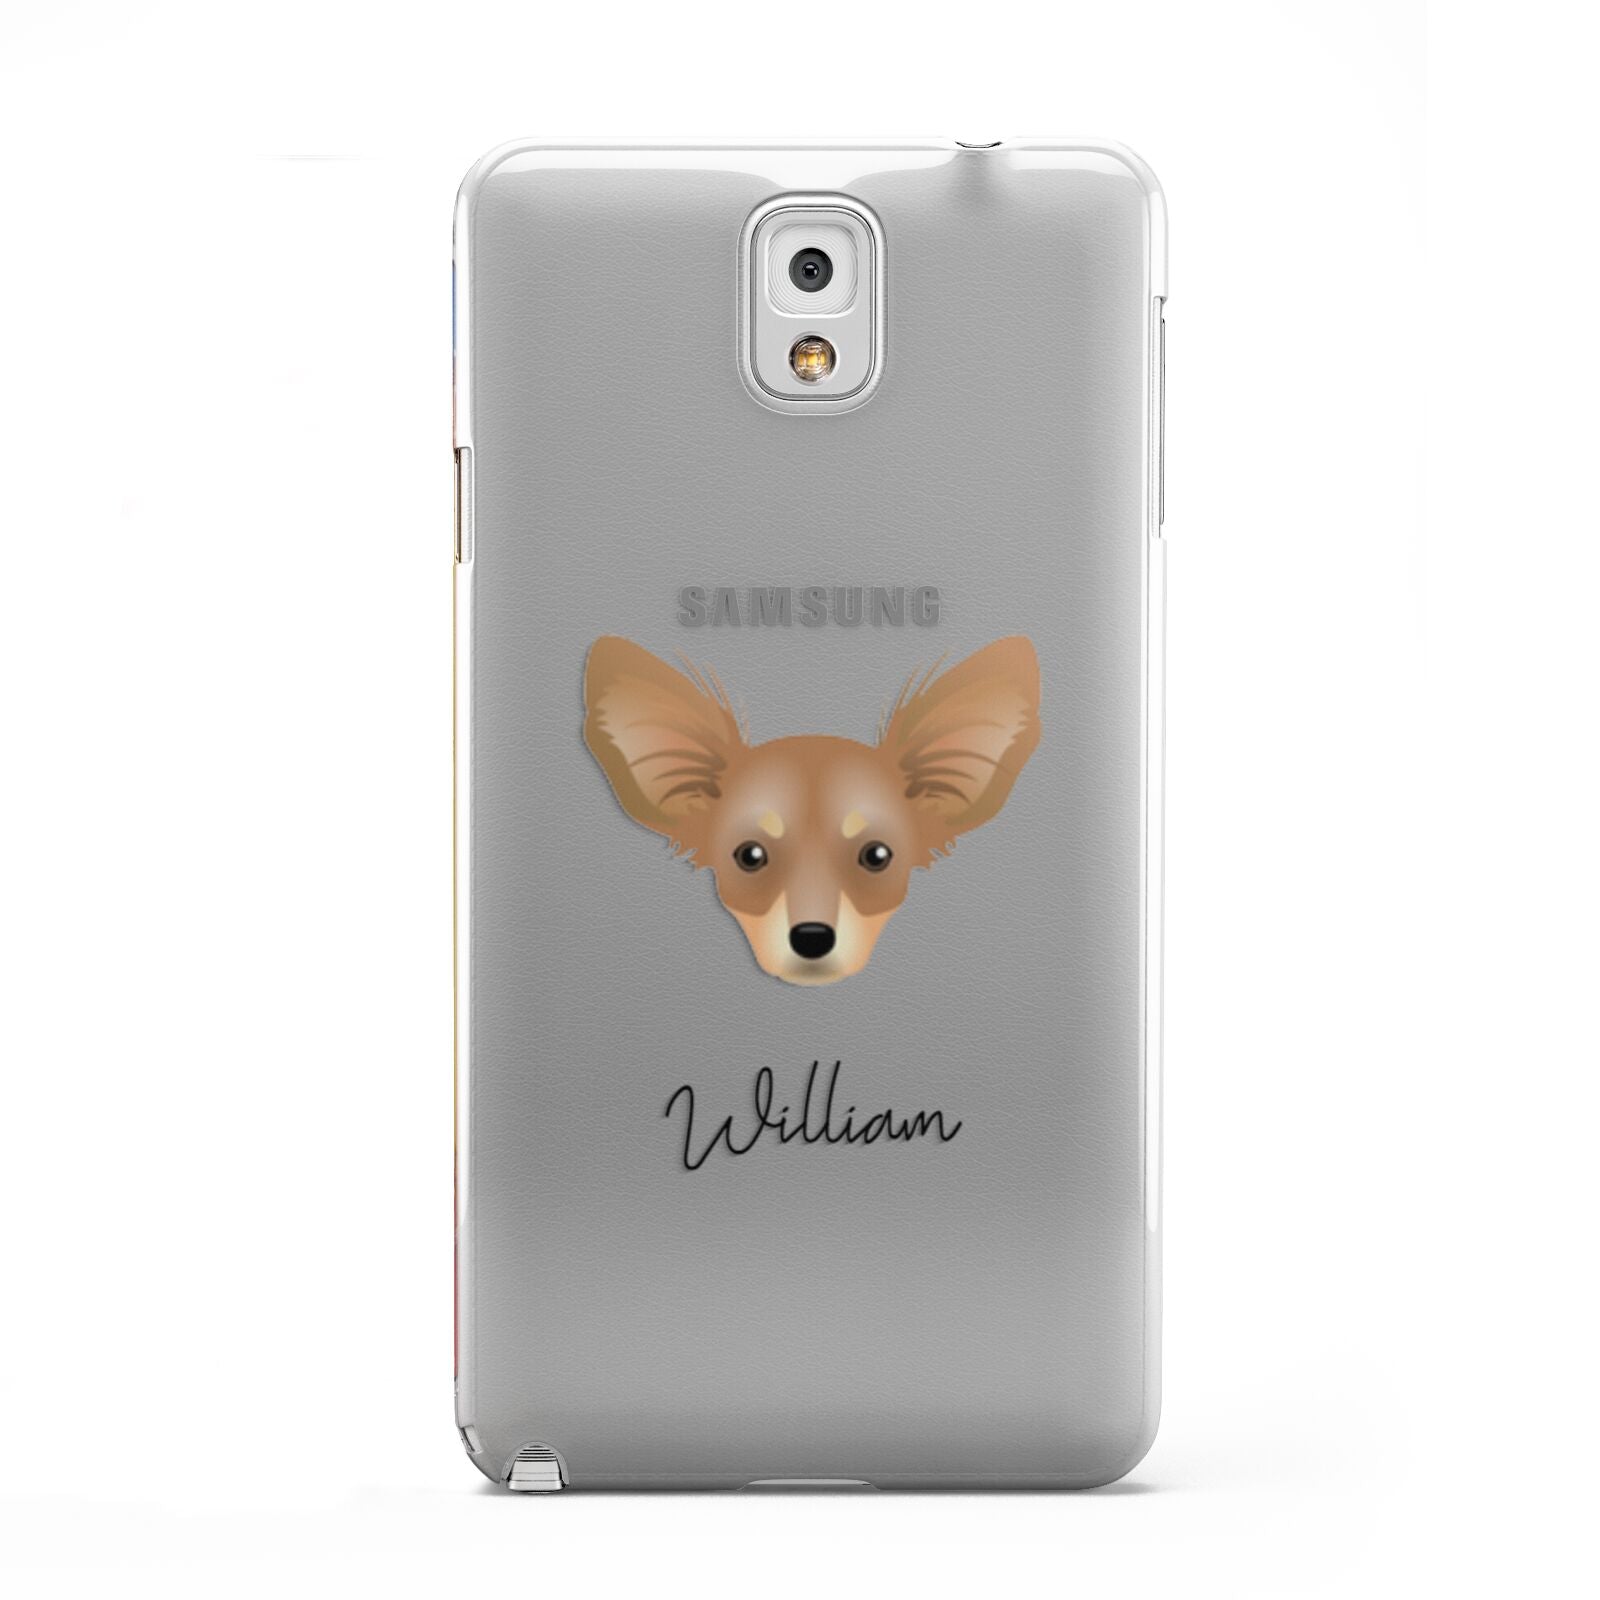 Russian Toy Personalised Samsung Galaxy Note 3 Case